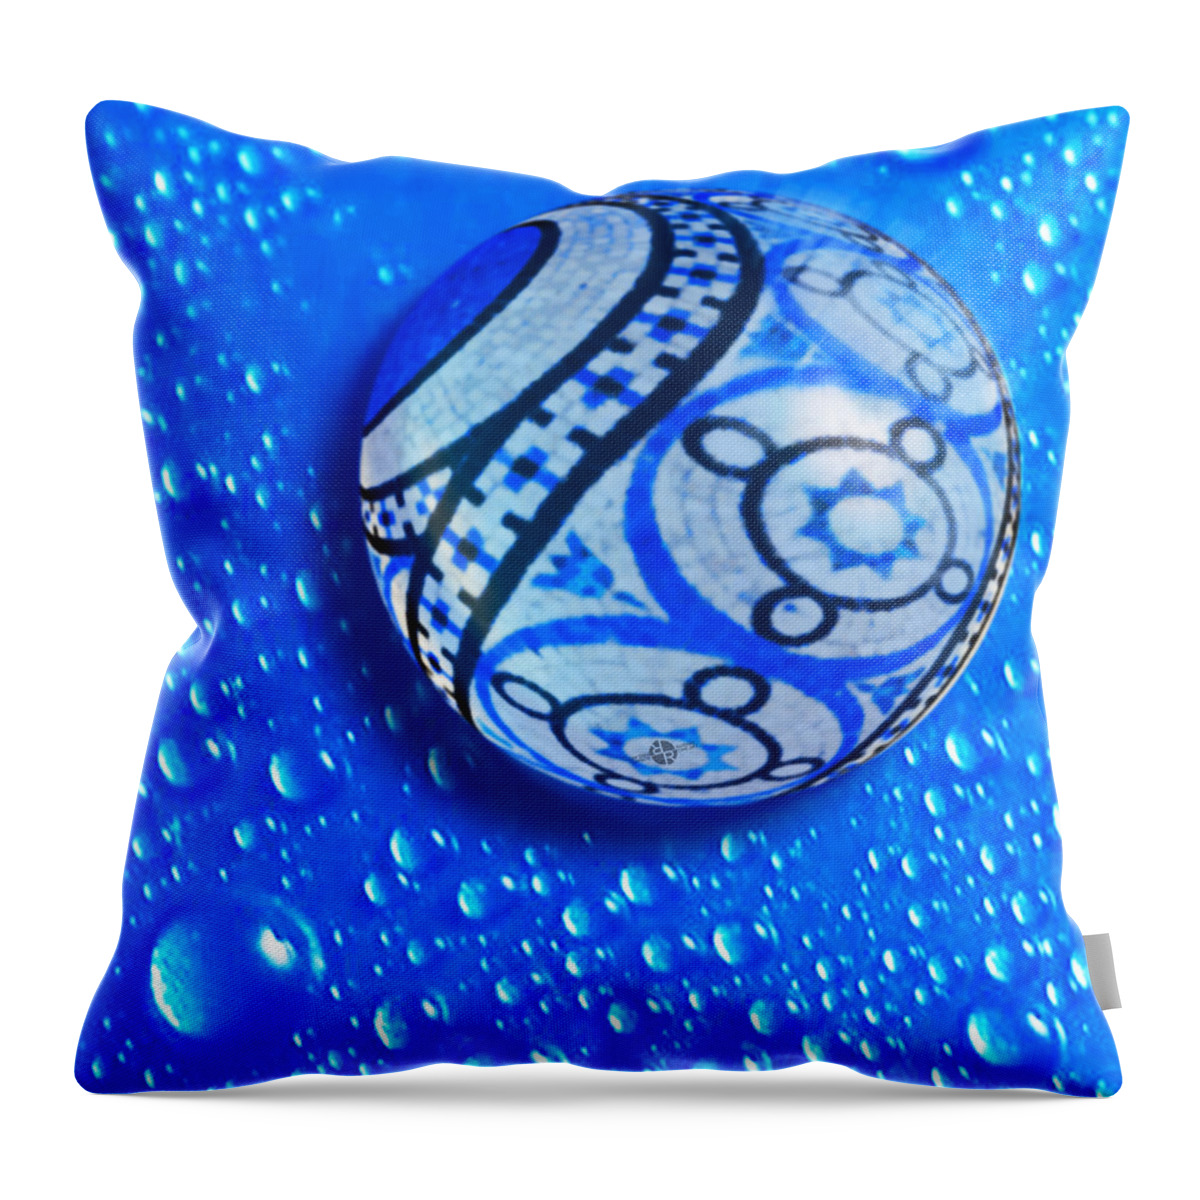 Ball Throw Pillow featuring the painting Stone And Water Orb Abstract by Tony Rubino